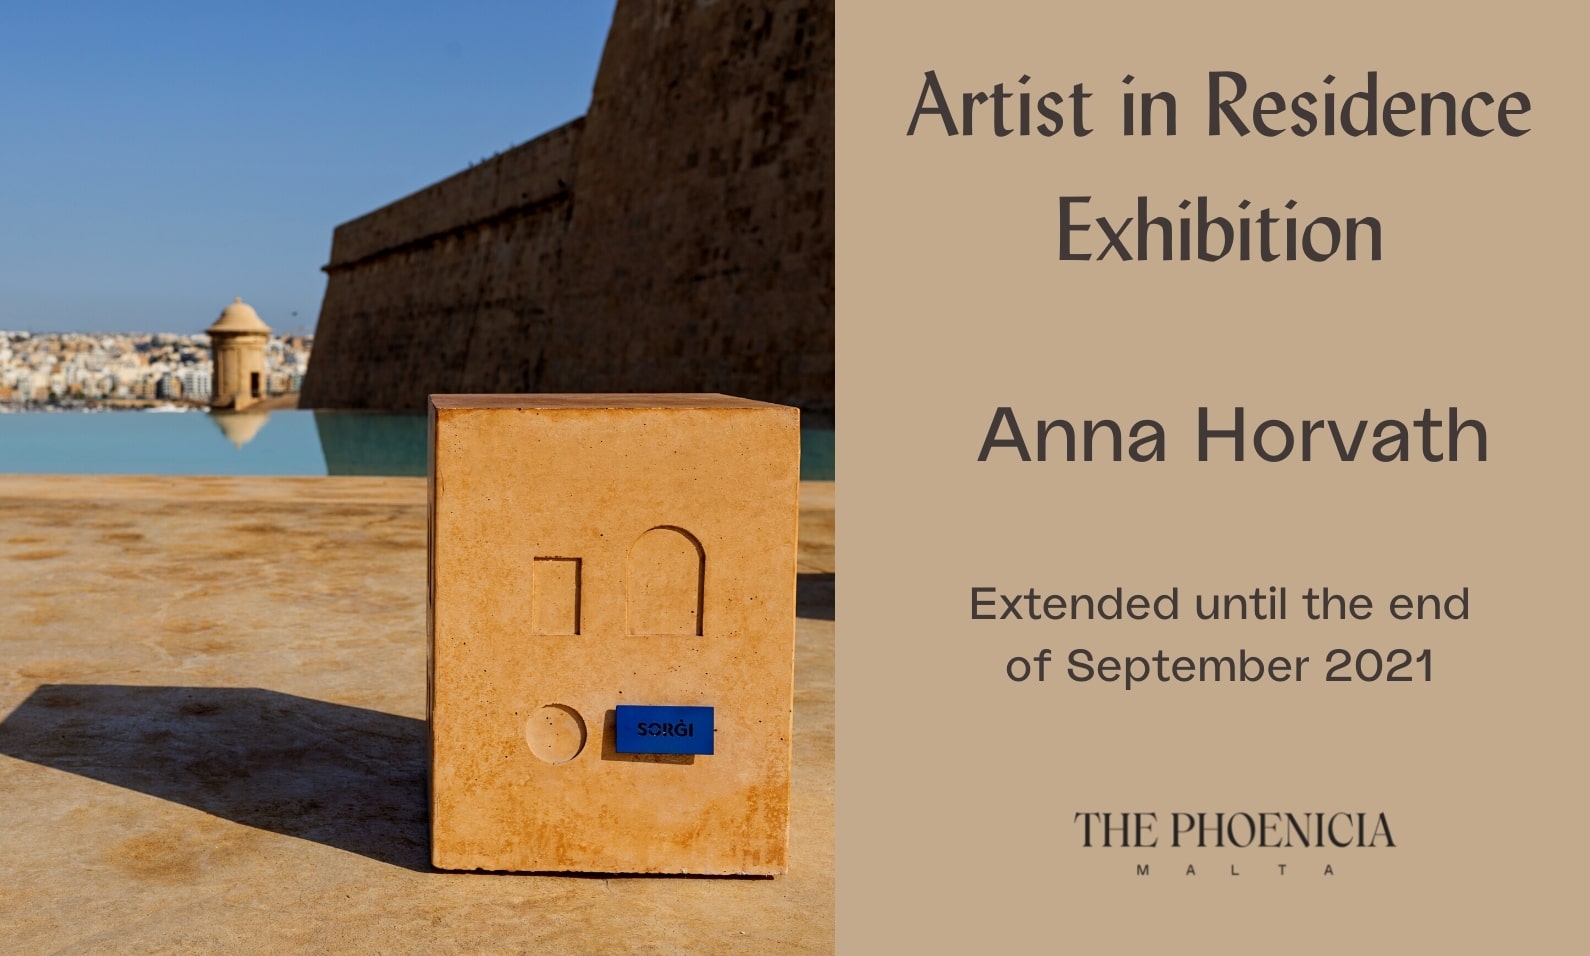 Artist in Residence - Anna Horvath - The Phoenicia Malta